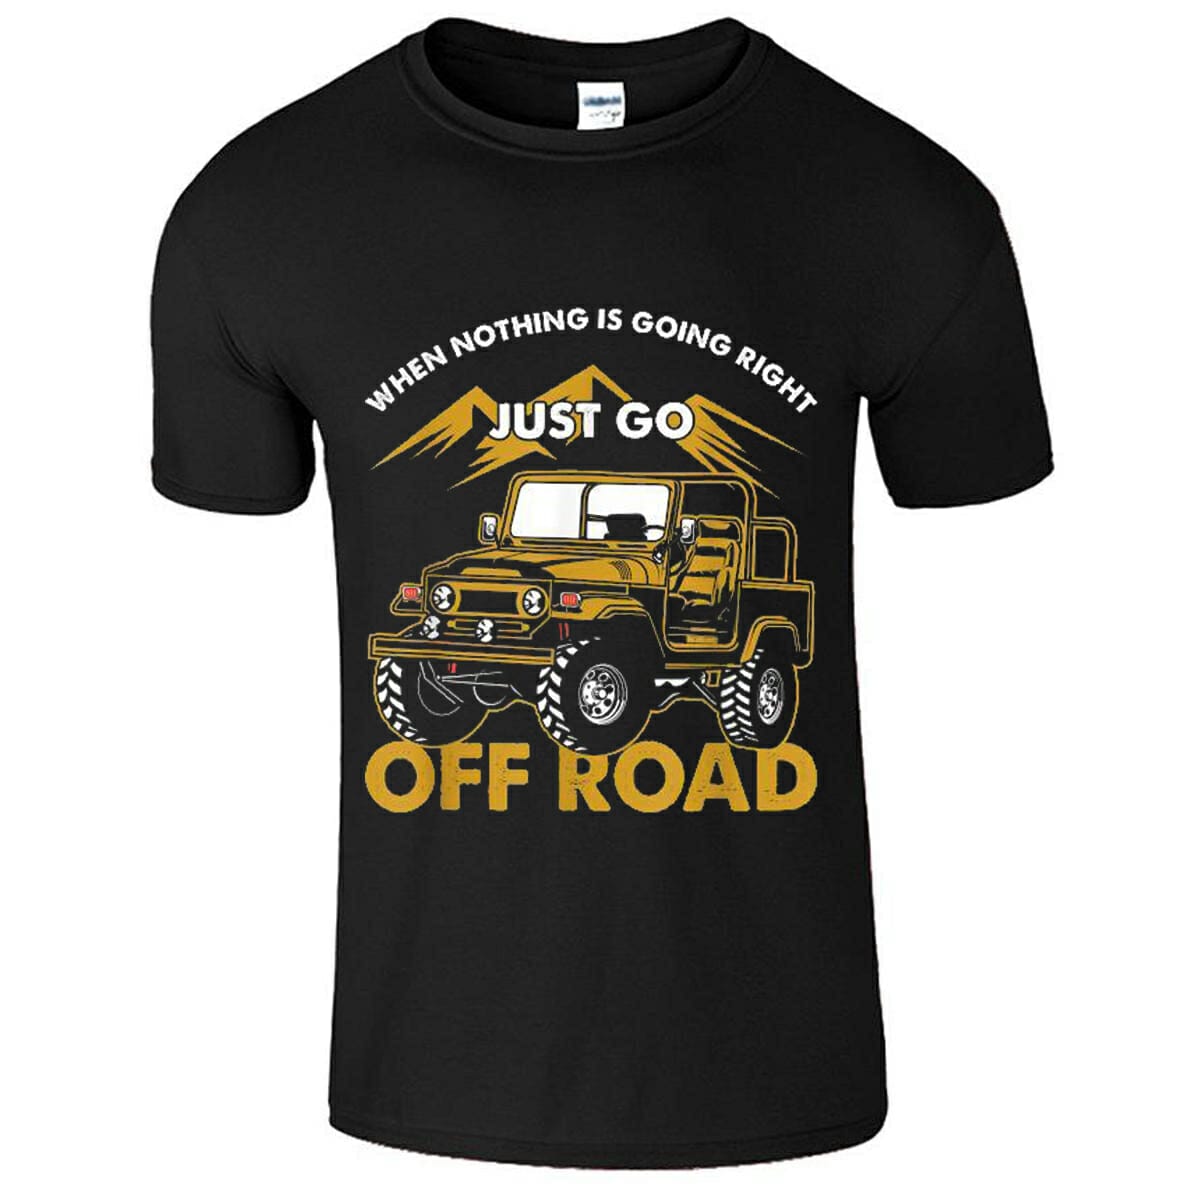 When Nothing Is Going Right Just Go Off Road T-Shirt Design